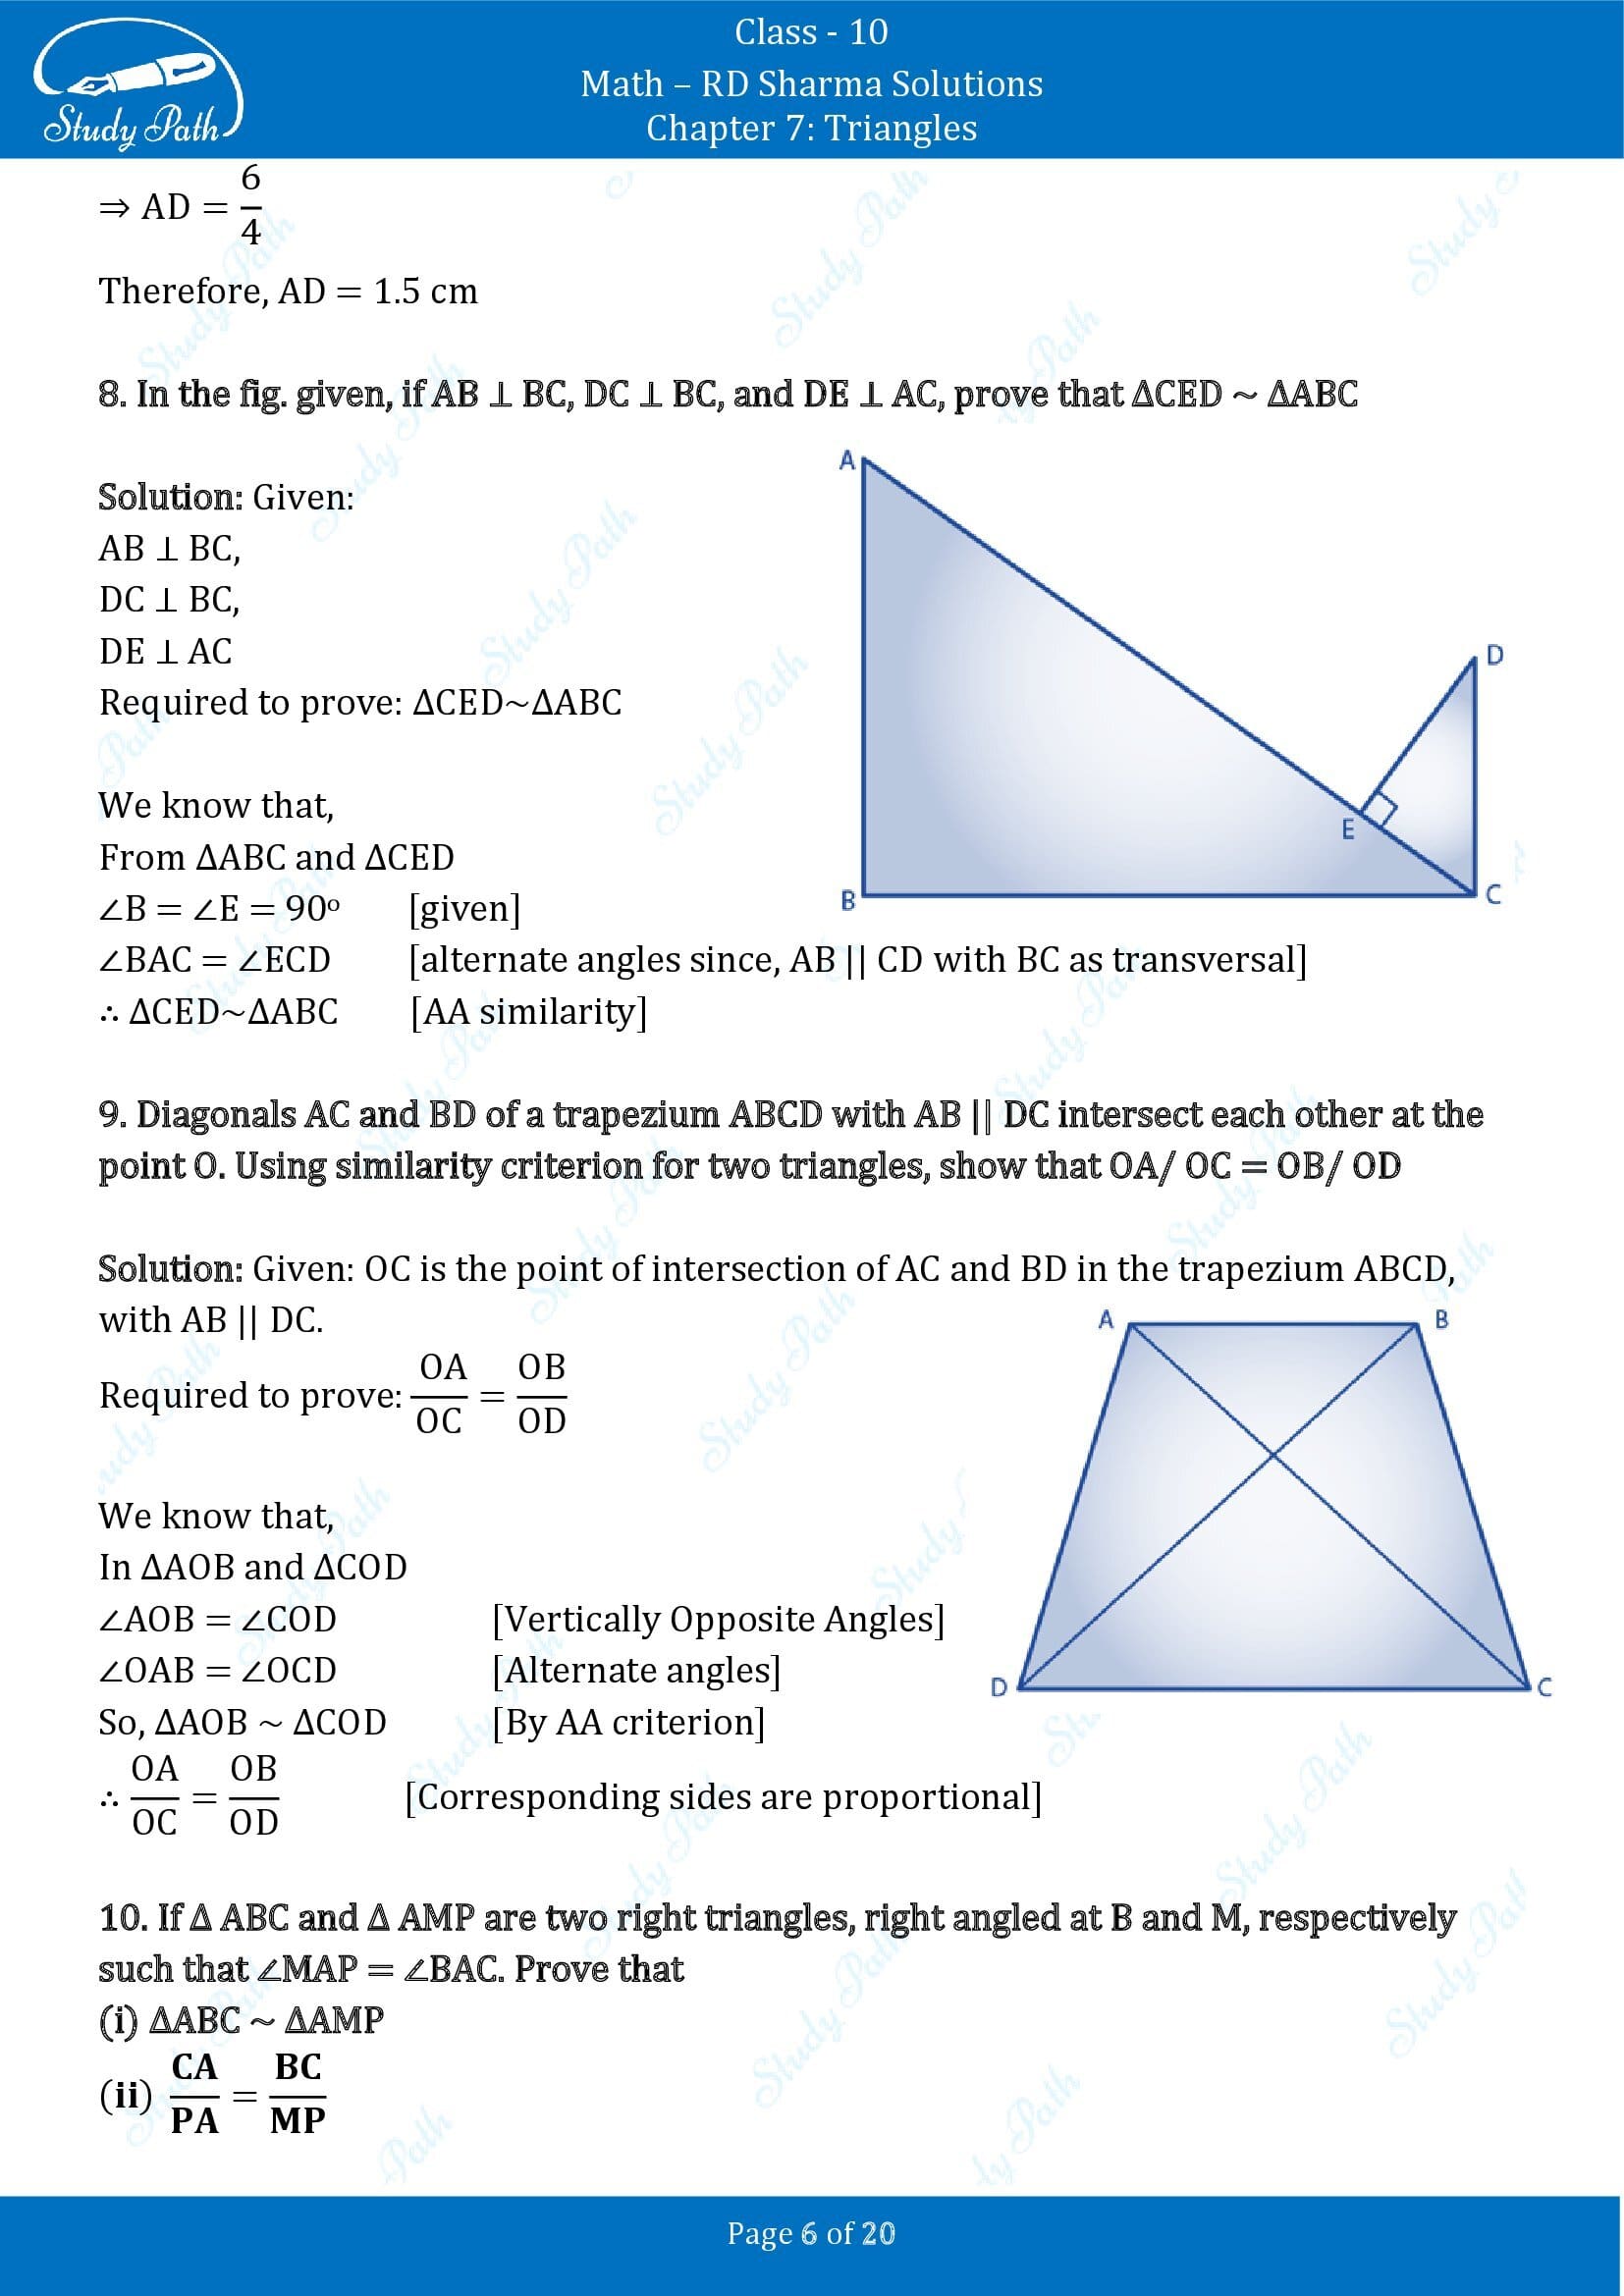 RD Sharma Solutions Class 10 Chapter 7 Triangles Exercise 7.5 00006